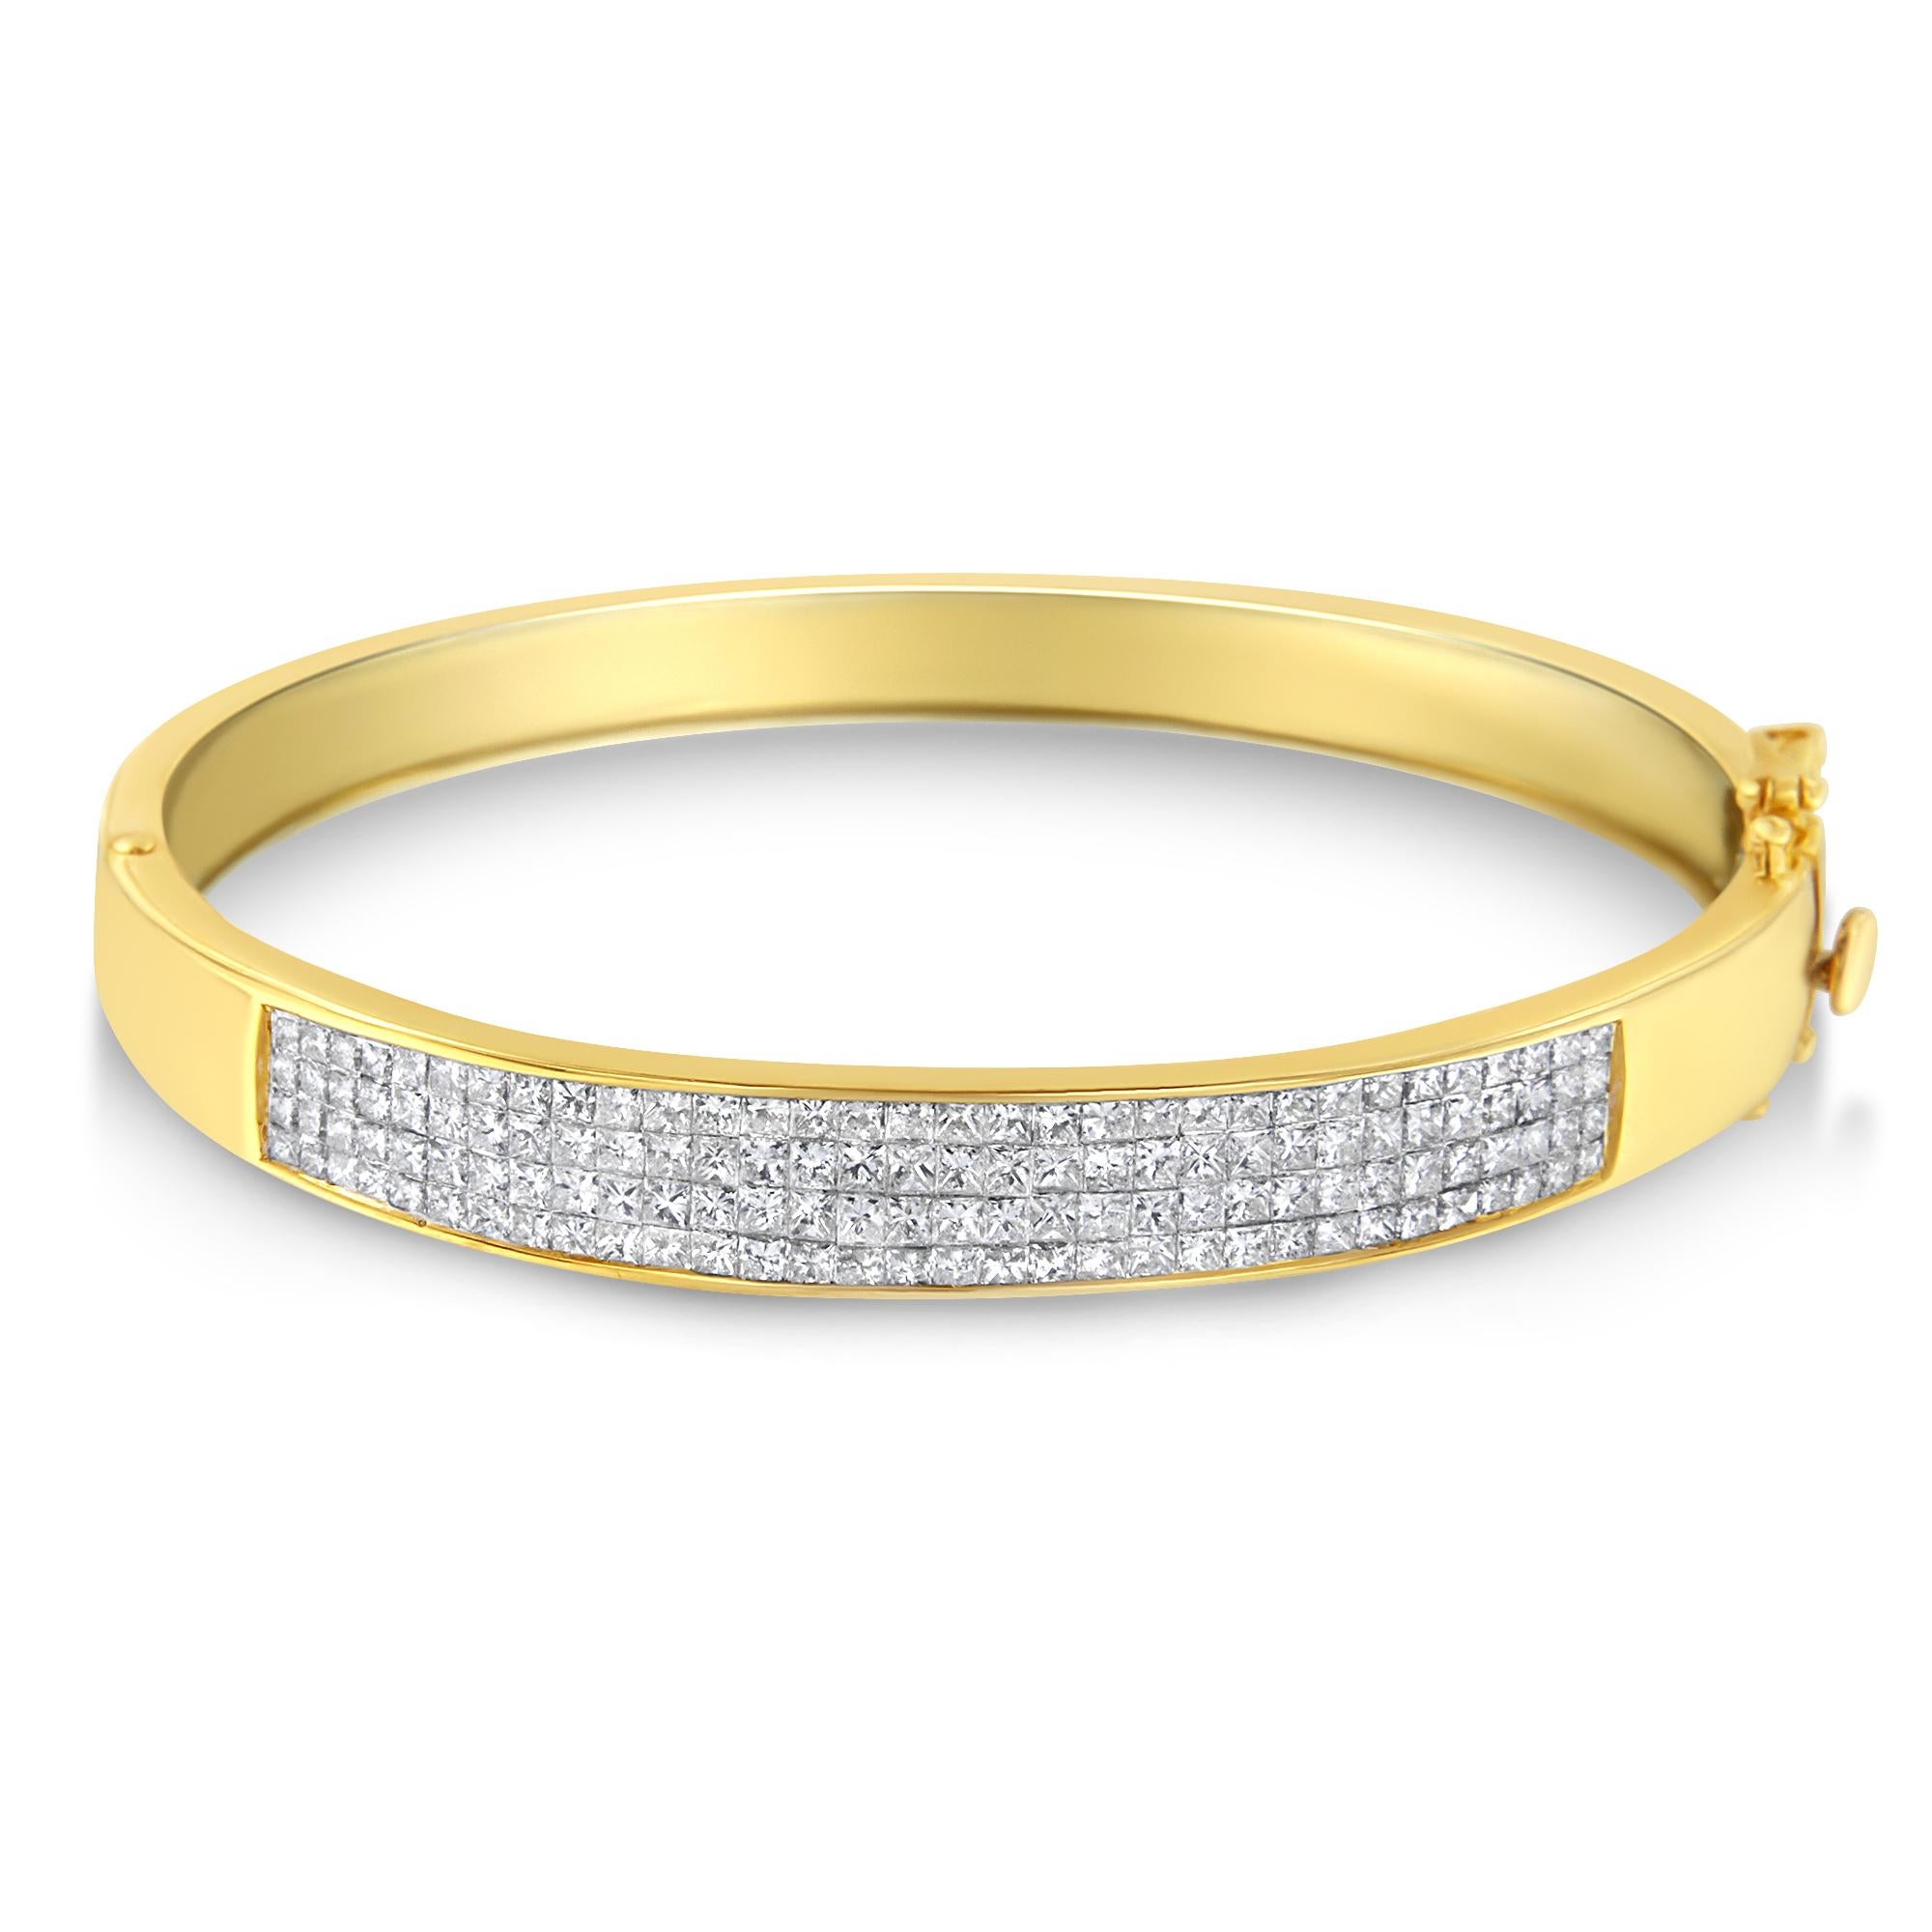 The richness and glory of this 4.0 Cttw diamond bracelet make it a perfect statement bangle for every woman. The beautiful princess cut diamonds are set on pure 14 karat gold. This bangle is lightweight, weighing just 18gm, so you can wear it for